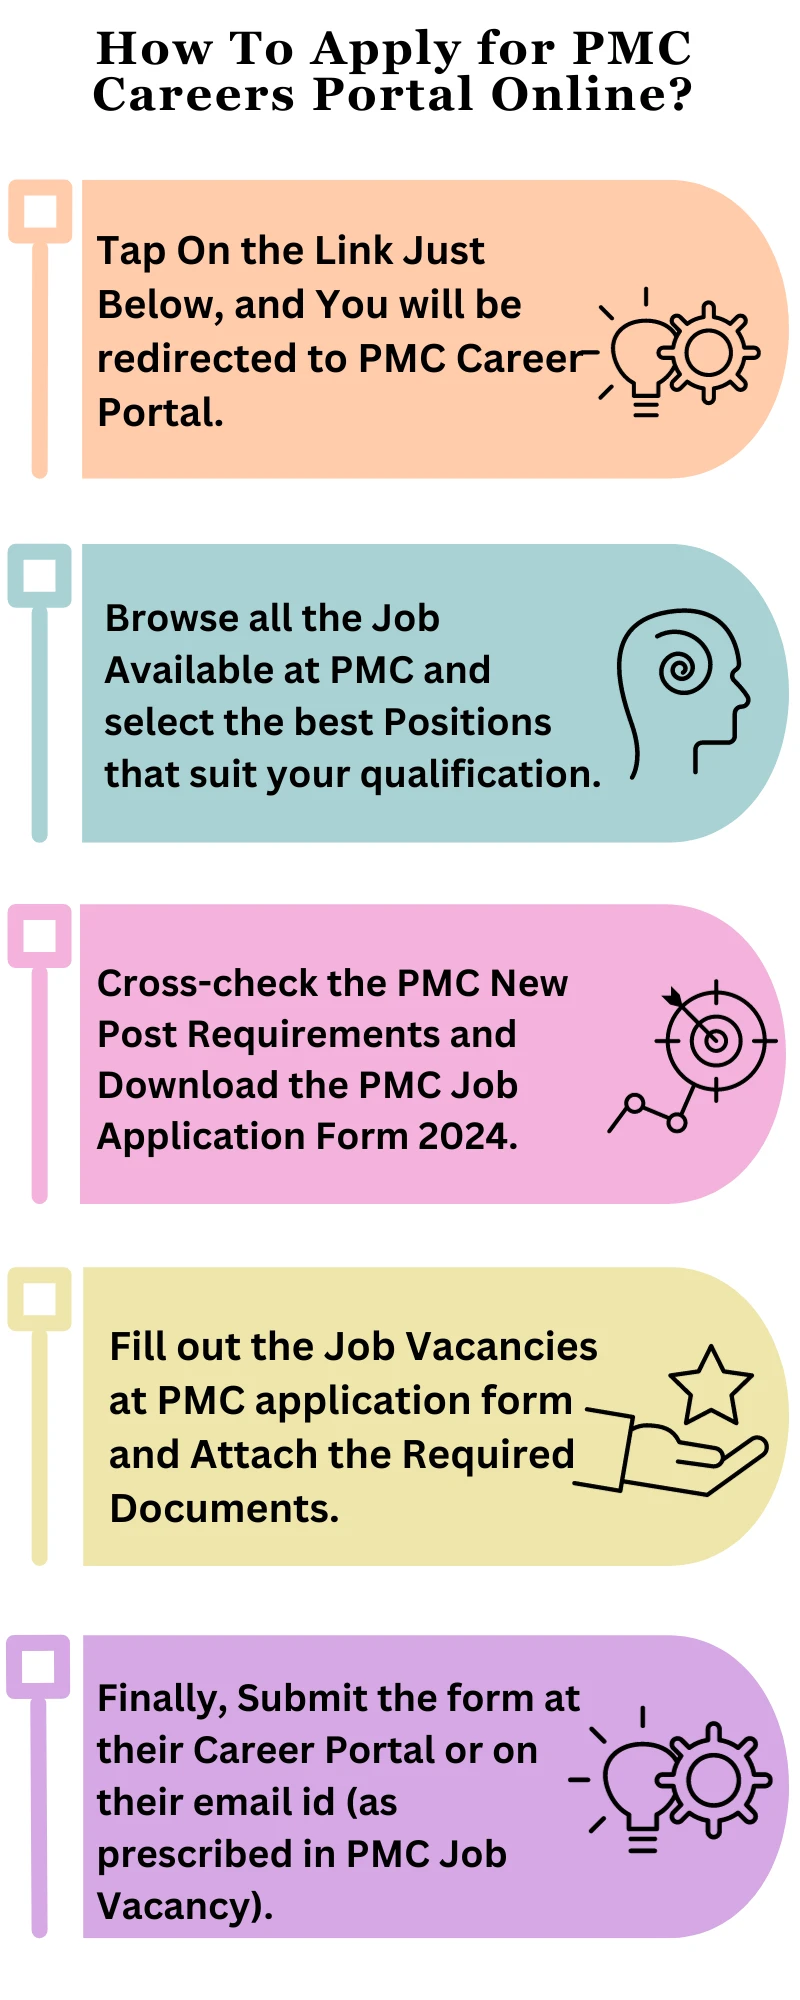 How To Apply for PMC Careers Portal Online?